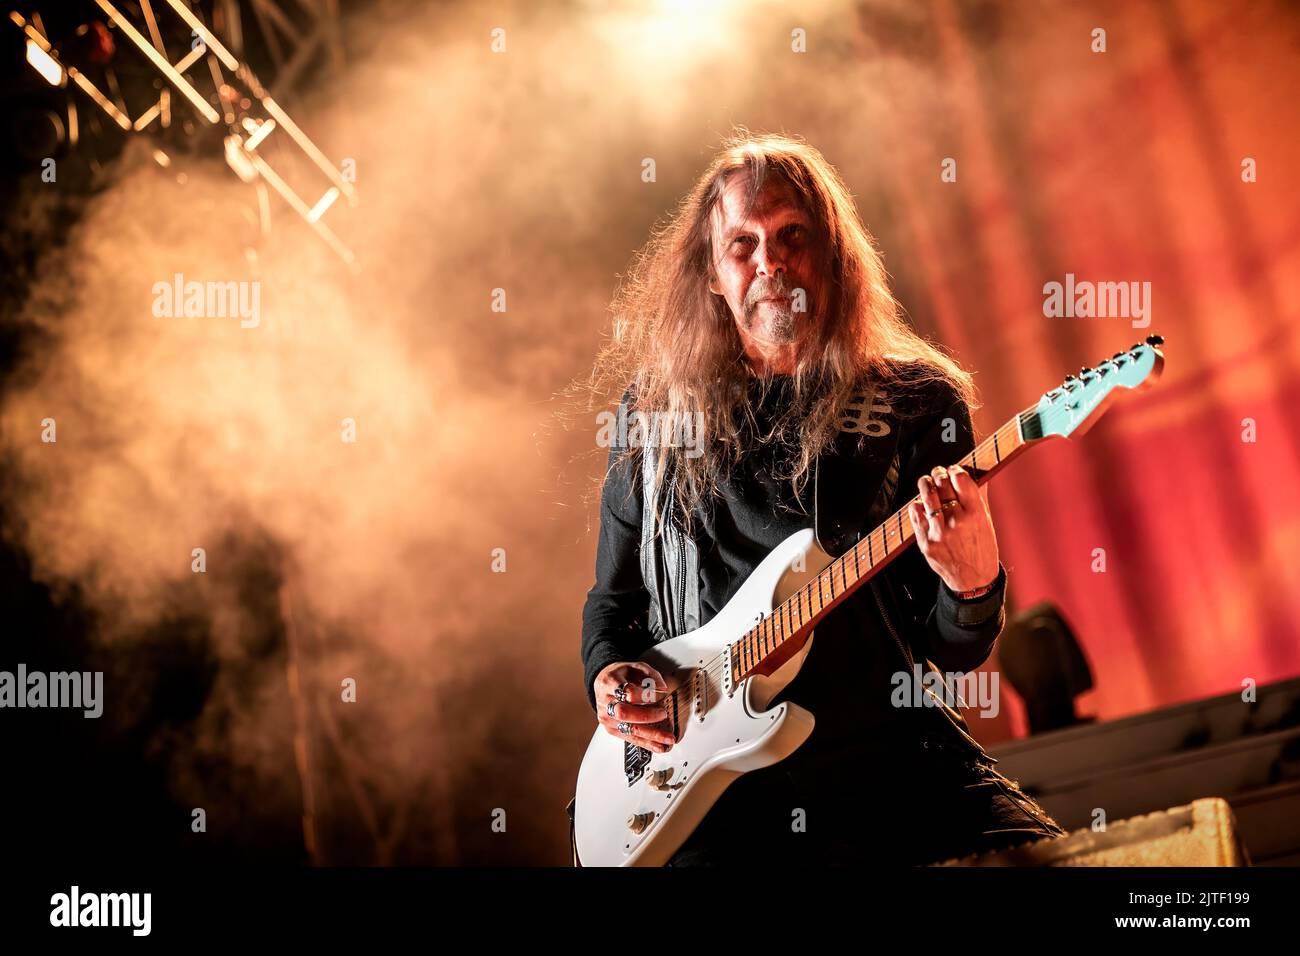 Solvesborg, Sweden. 10th, June 2022.The Danish heavy metal band Mercyful Fate performs a live concert during the Swedish music festival Sweden Rock Festival 2022 in Solvesborg. Here guitarist Mike Wead is seen live on stage. (Photo credit: Gonzales Photo - Terje Dokken). Stock Photo